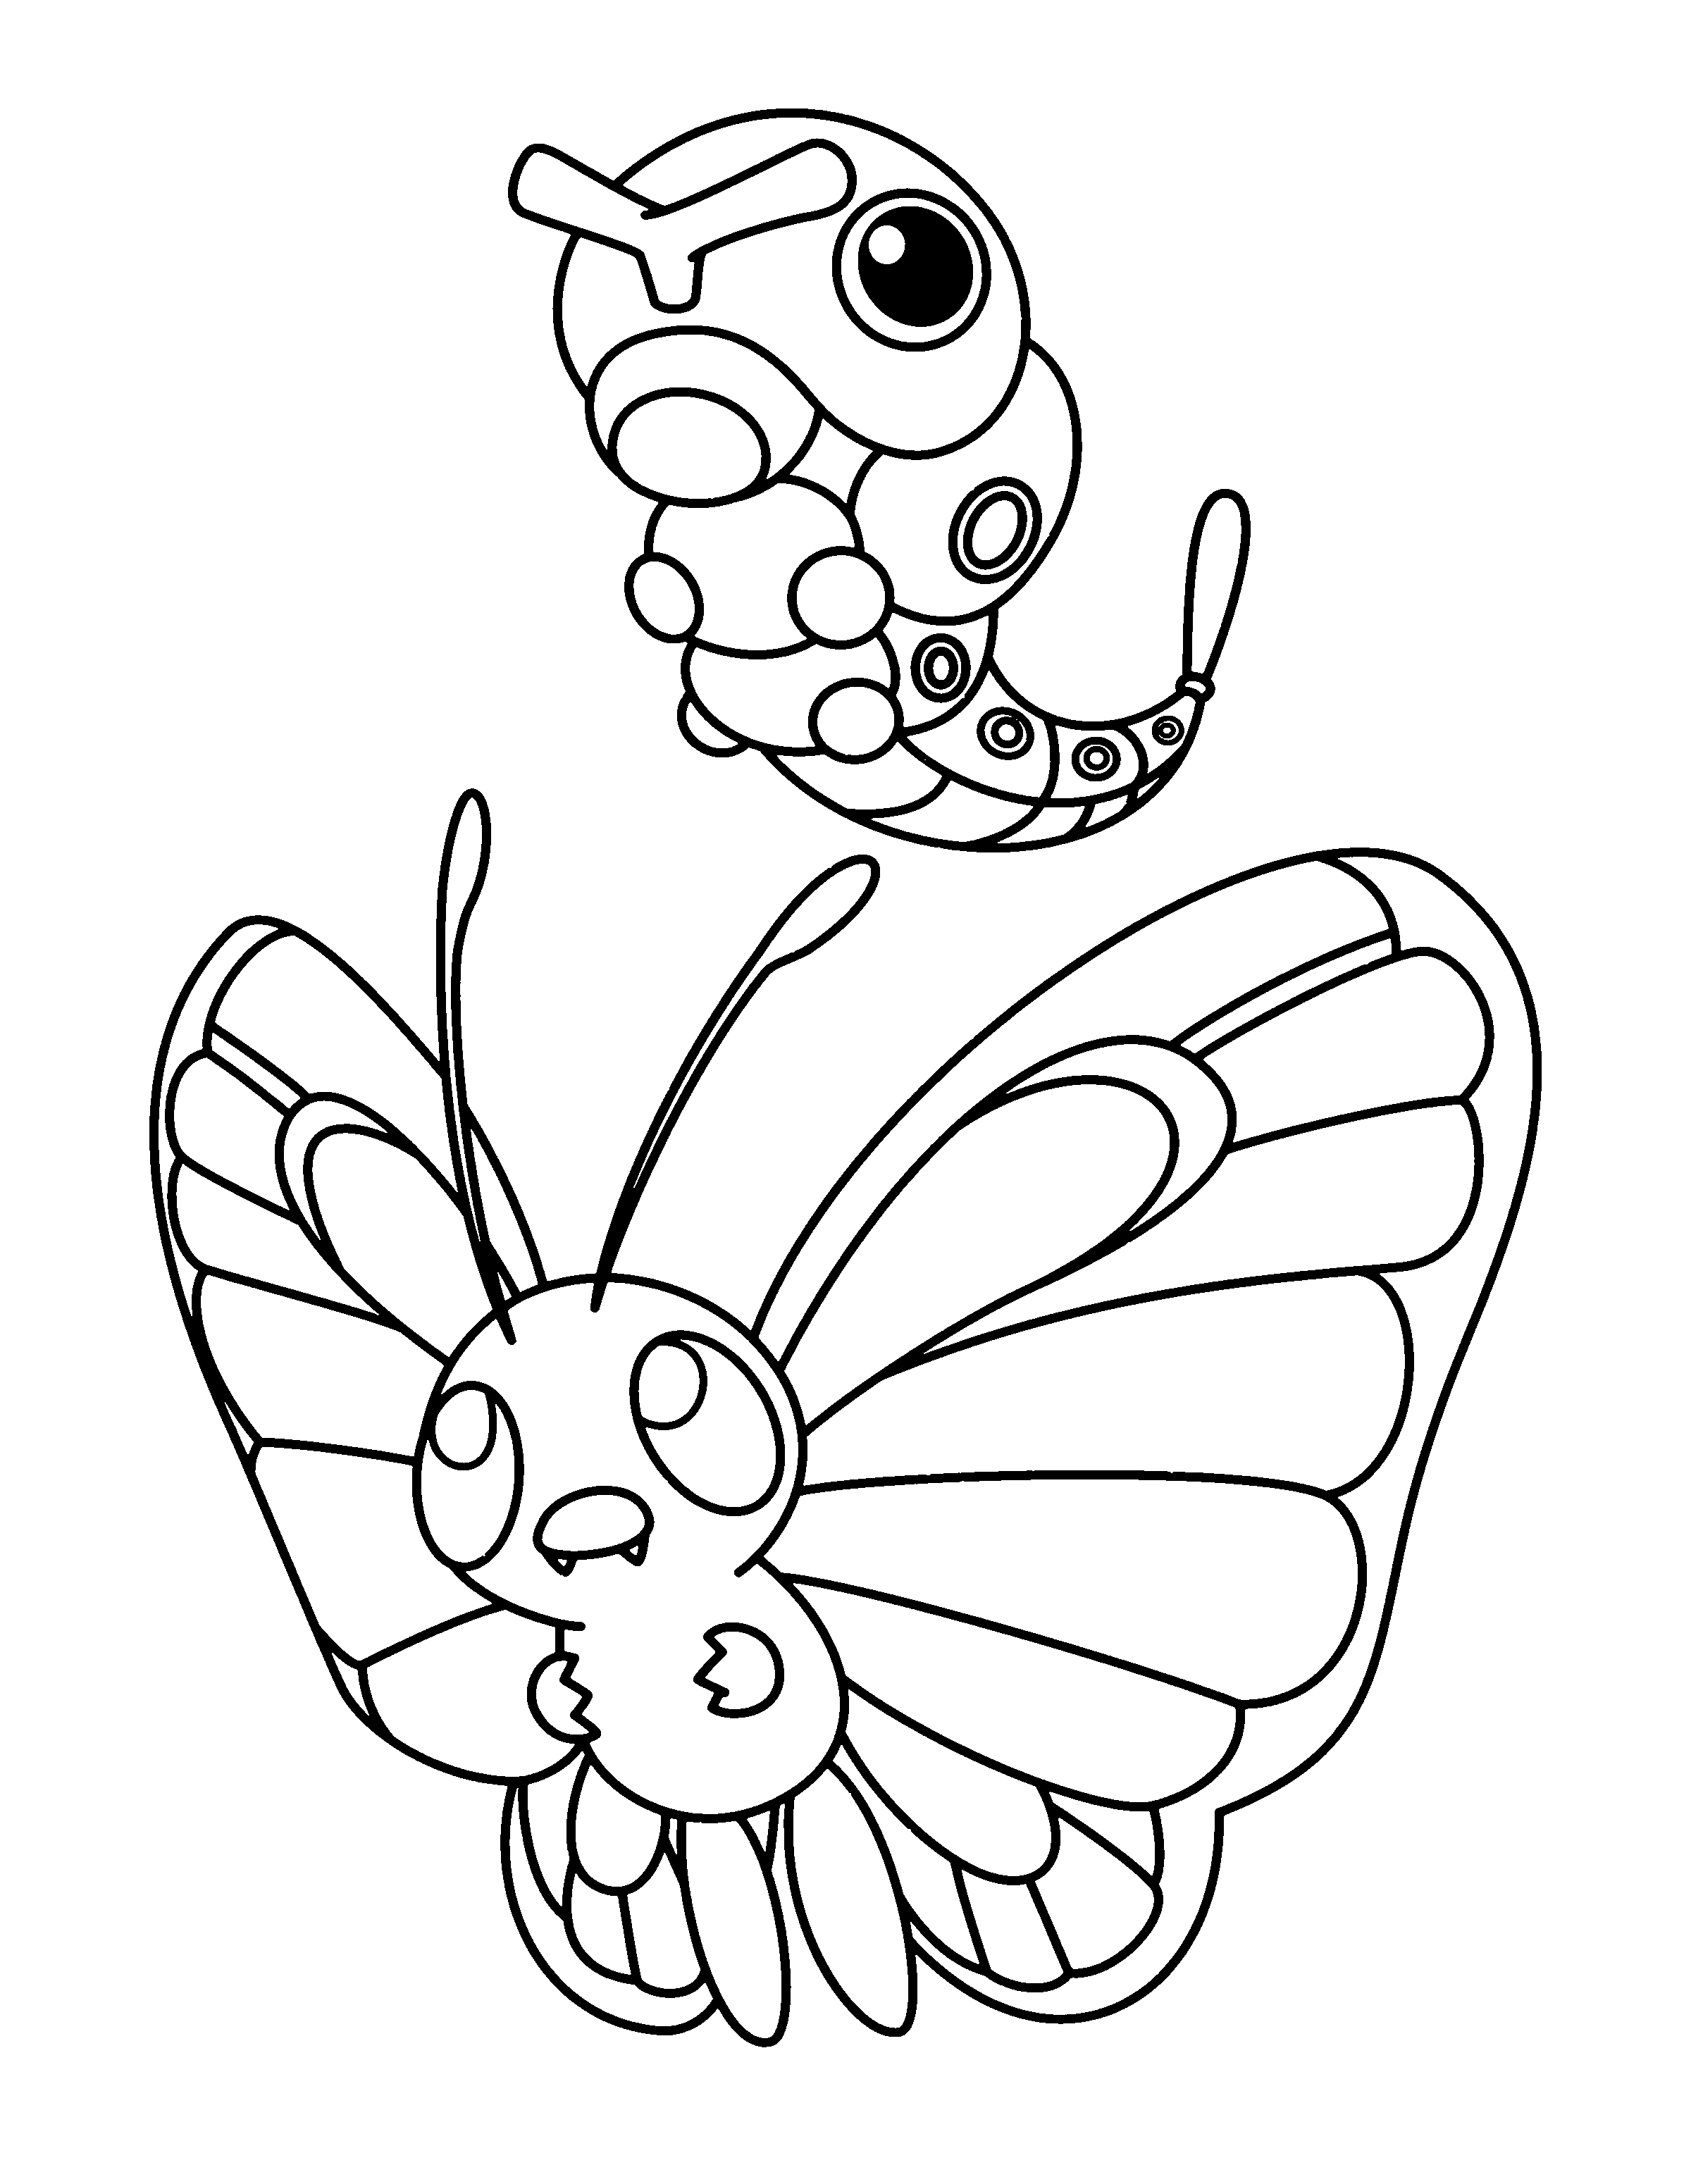 animated-coloring-pages-pokemon-image-0912